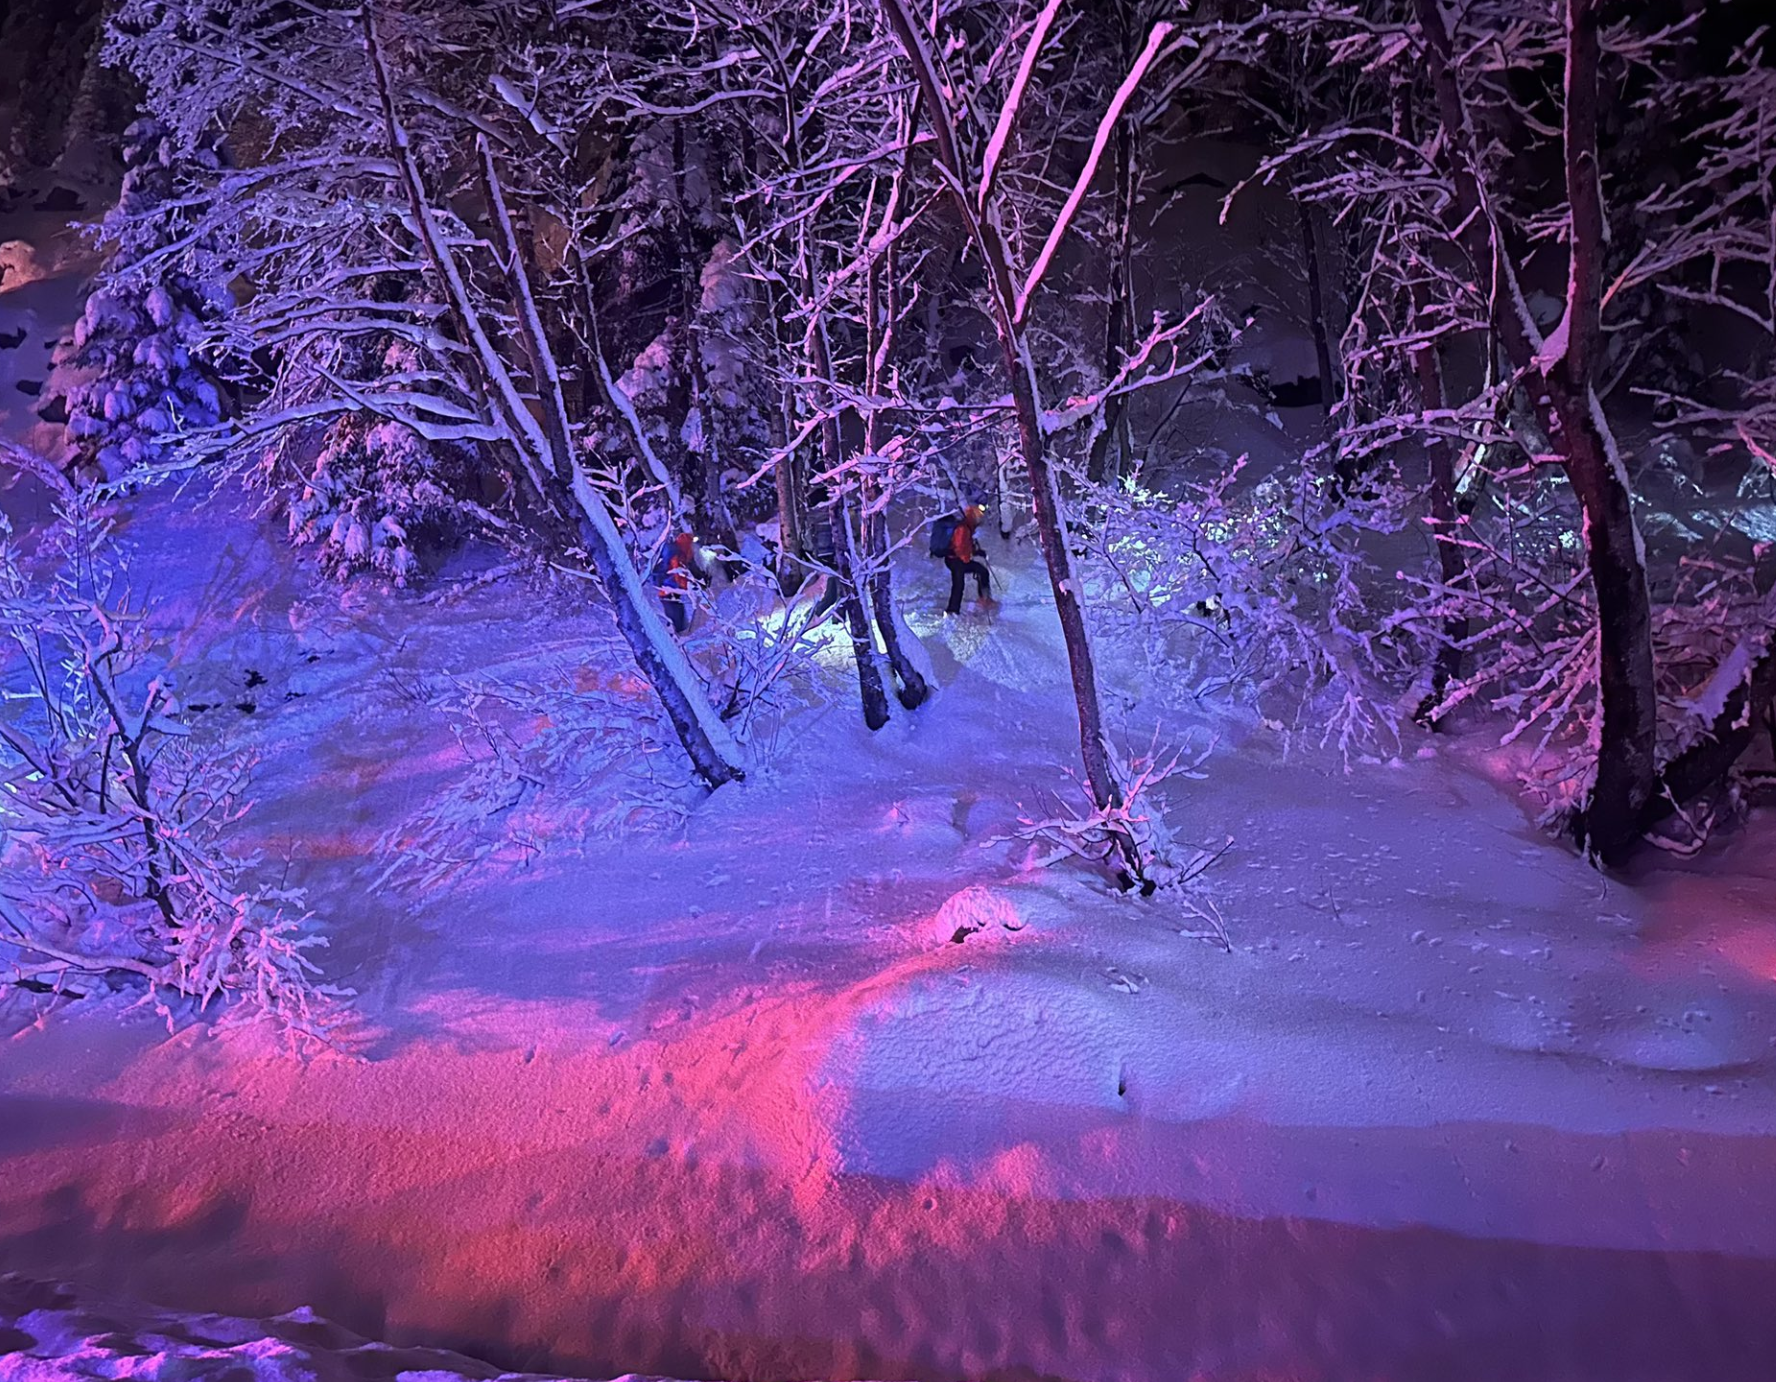  Lost Skiers Rescued From 100-Foot Cliff Near I-90 in Snoqualmie, Washington 